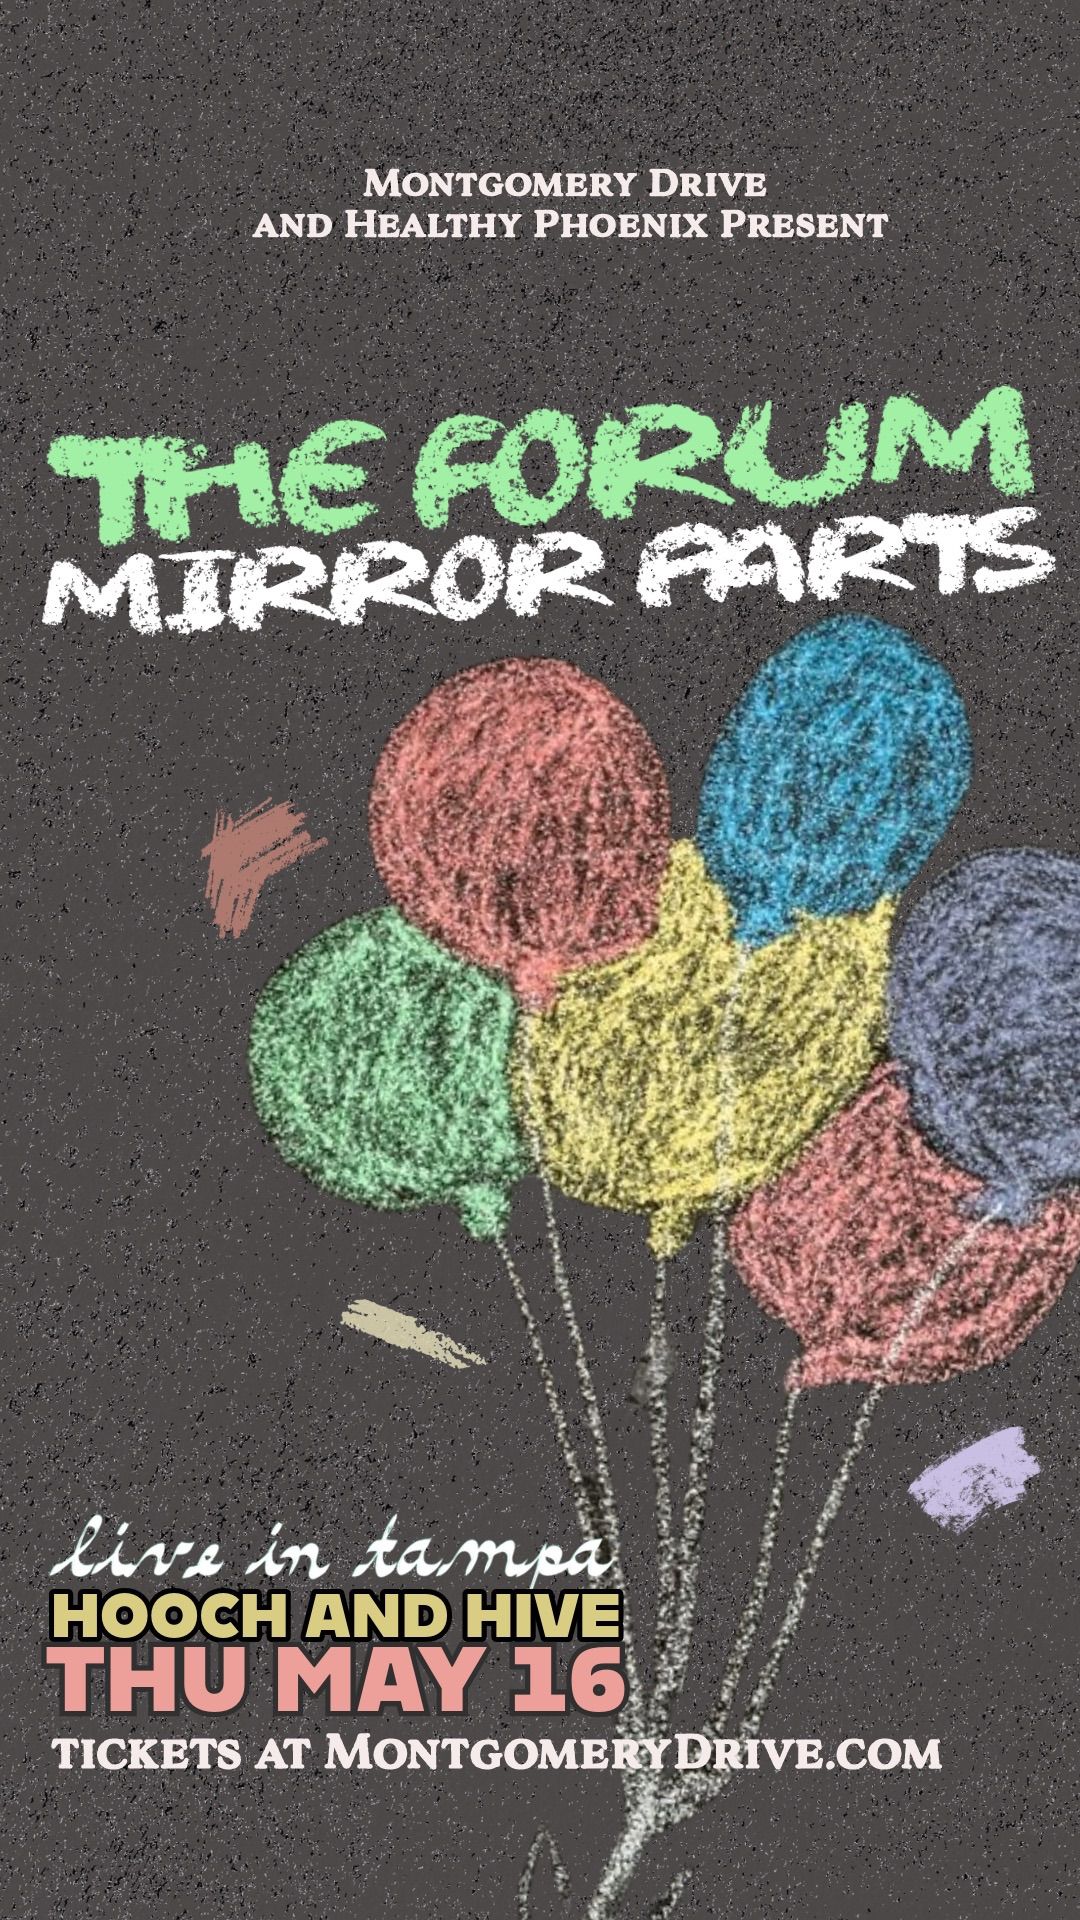 The Forum and Mirror Parts at Hooch And Hive - Tampa, FL